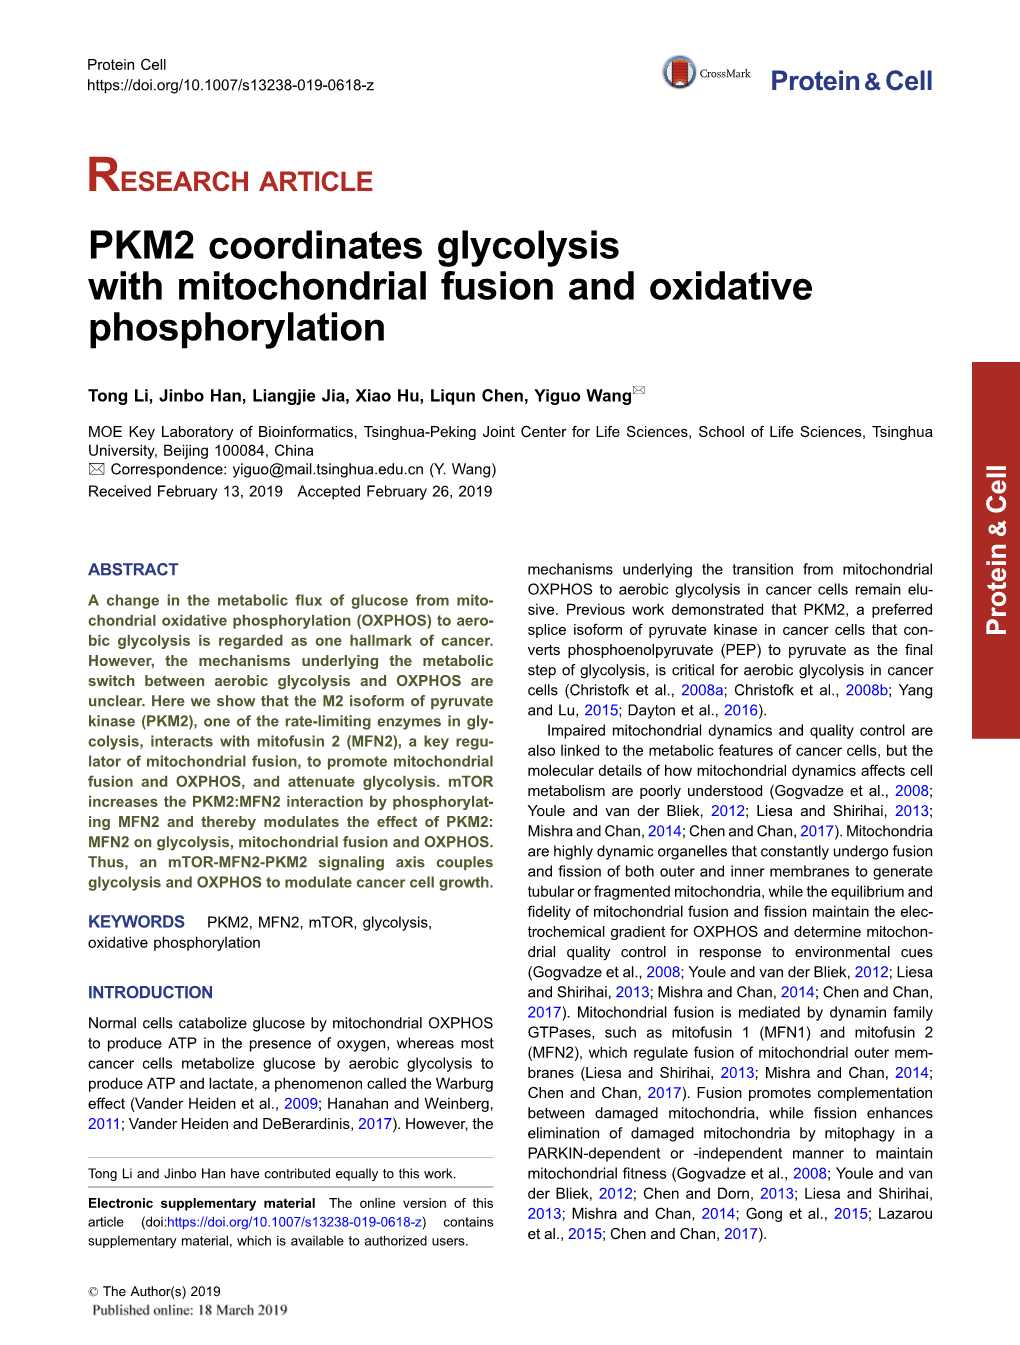 PKM2 Coordinates Glycolysis with Mitochondrial Fusion and Oxidative Phosphorylation